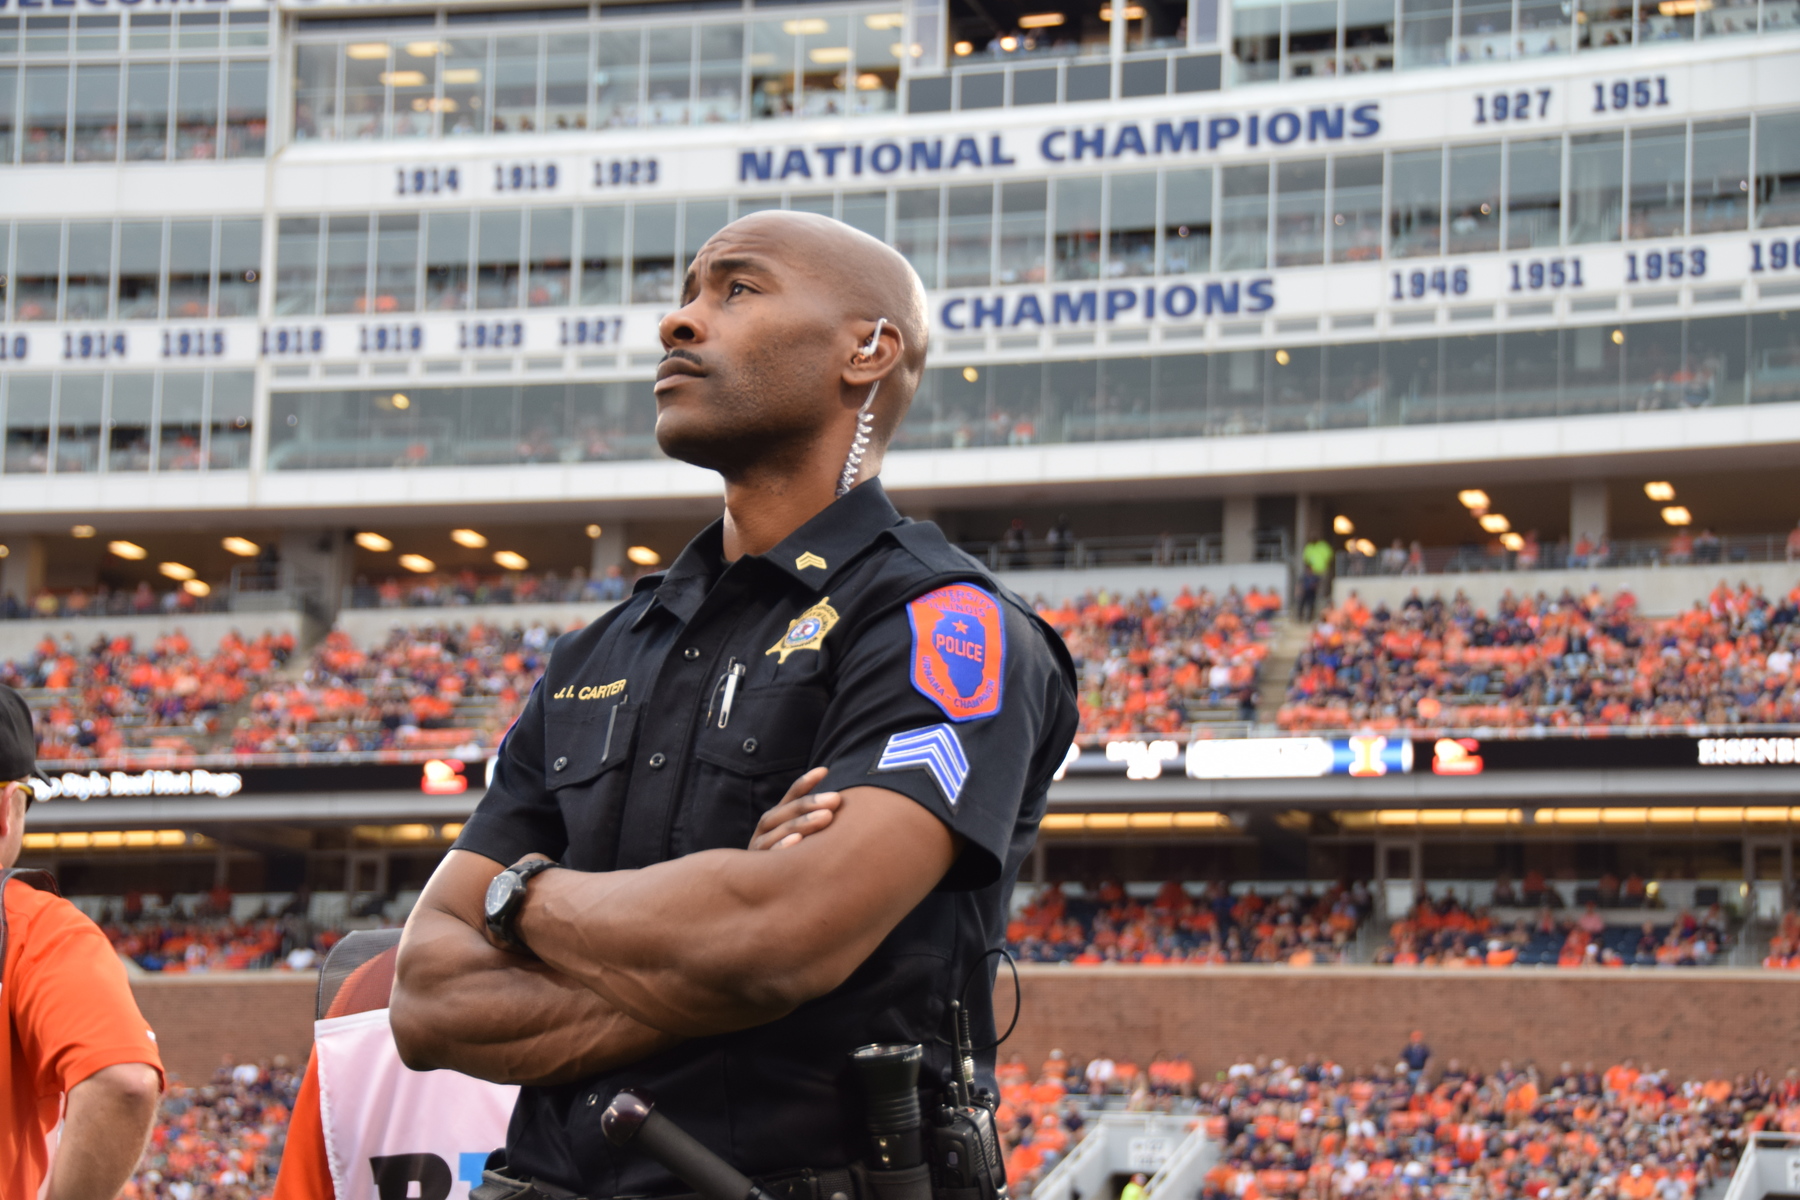 Sgt. James Carter stands watch at a Fighting Illini football game.